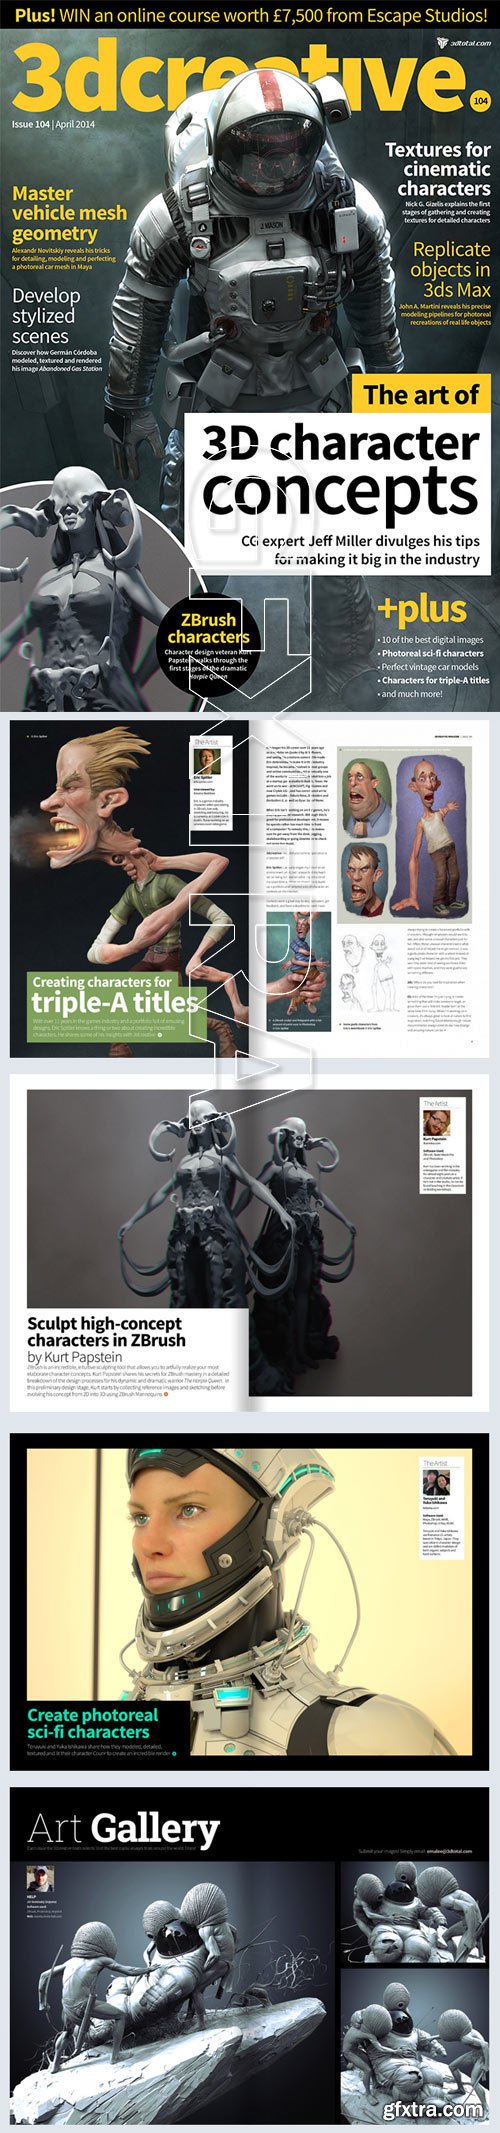 3DCreative: Issue 104 - April 2014 HiRes